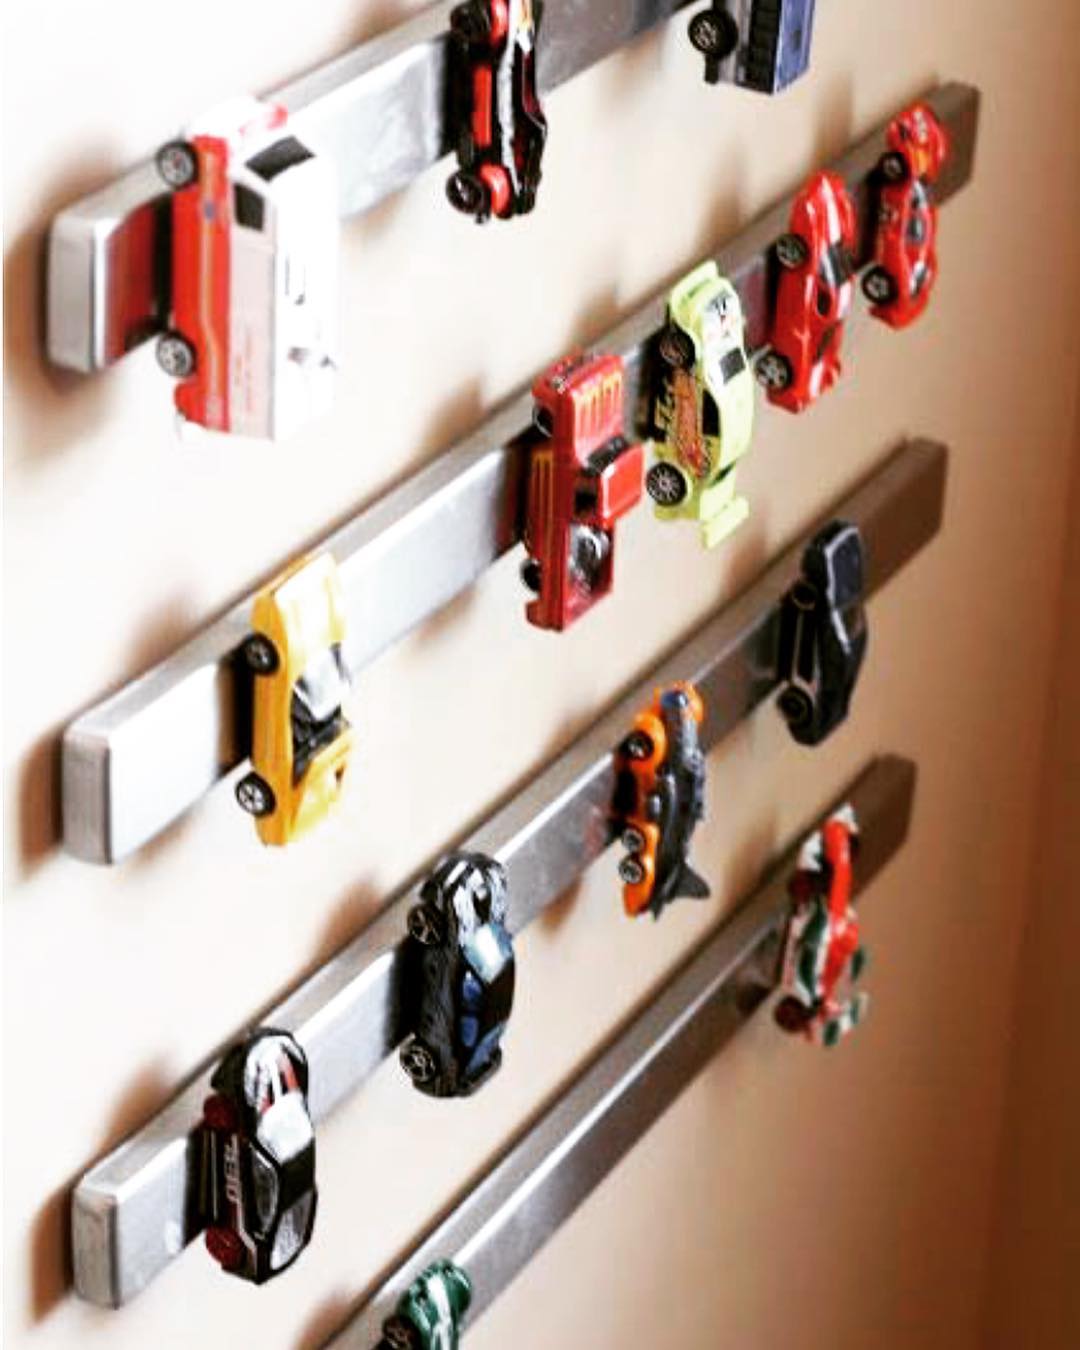 Magnetic Strips on Walls to Hold Toy Cars. Photo by Instagram user @precision organizing